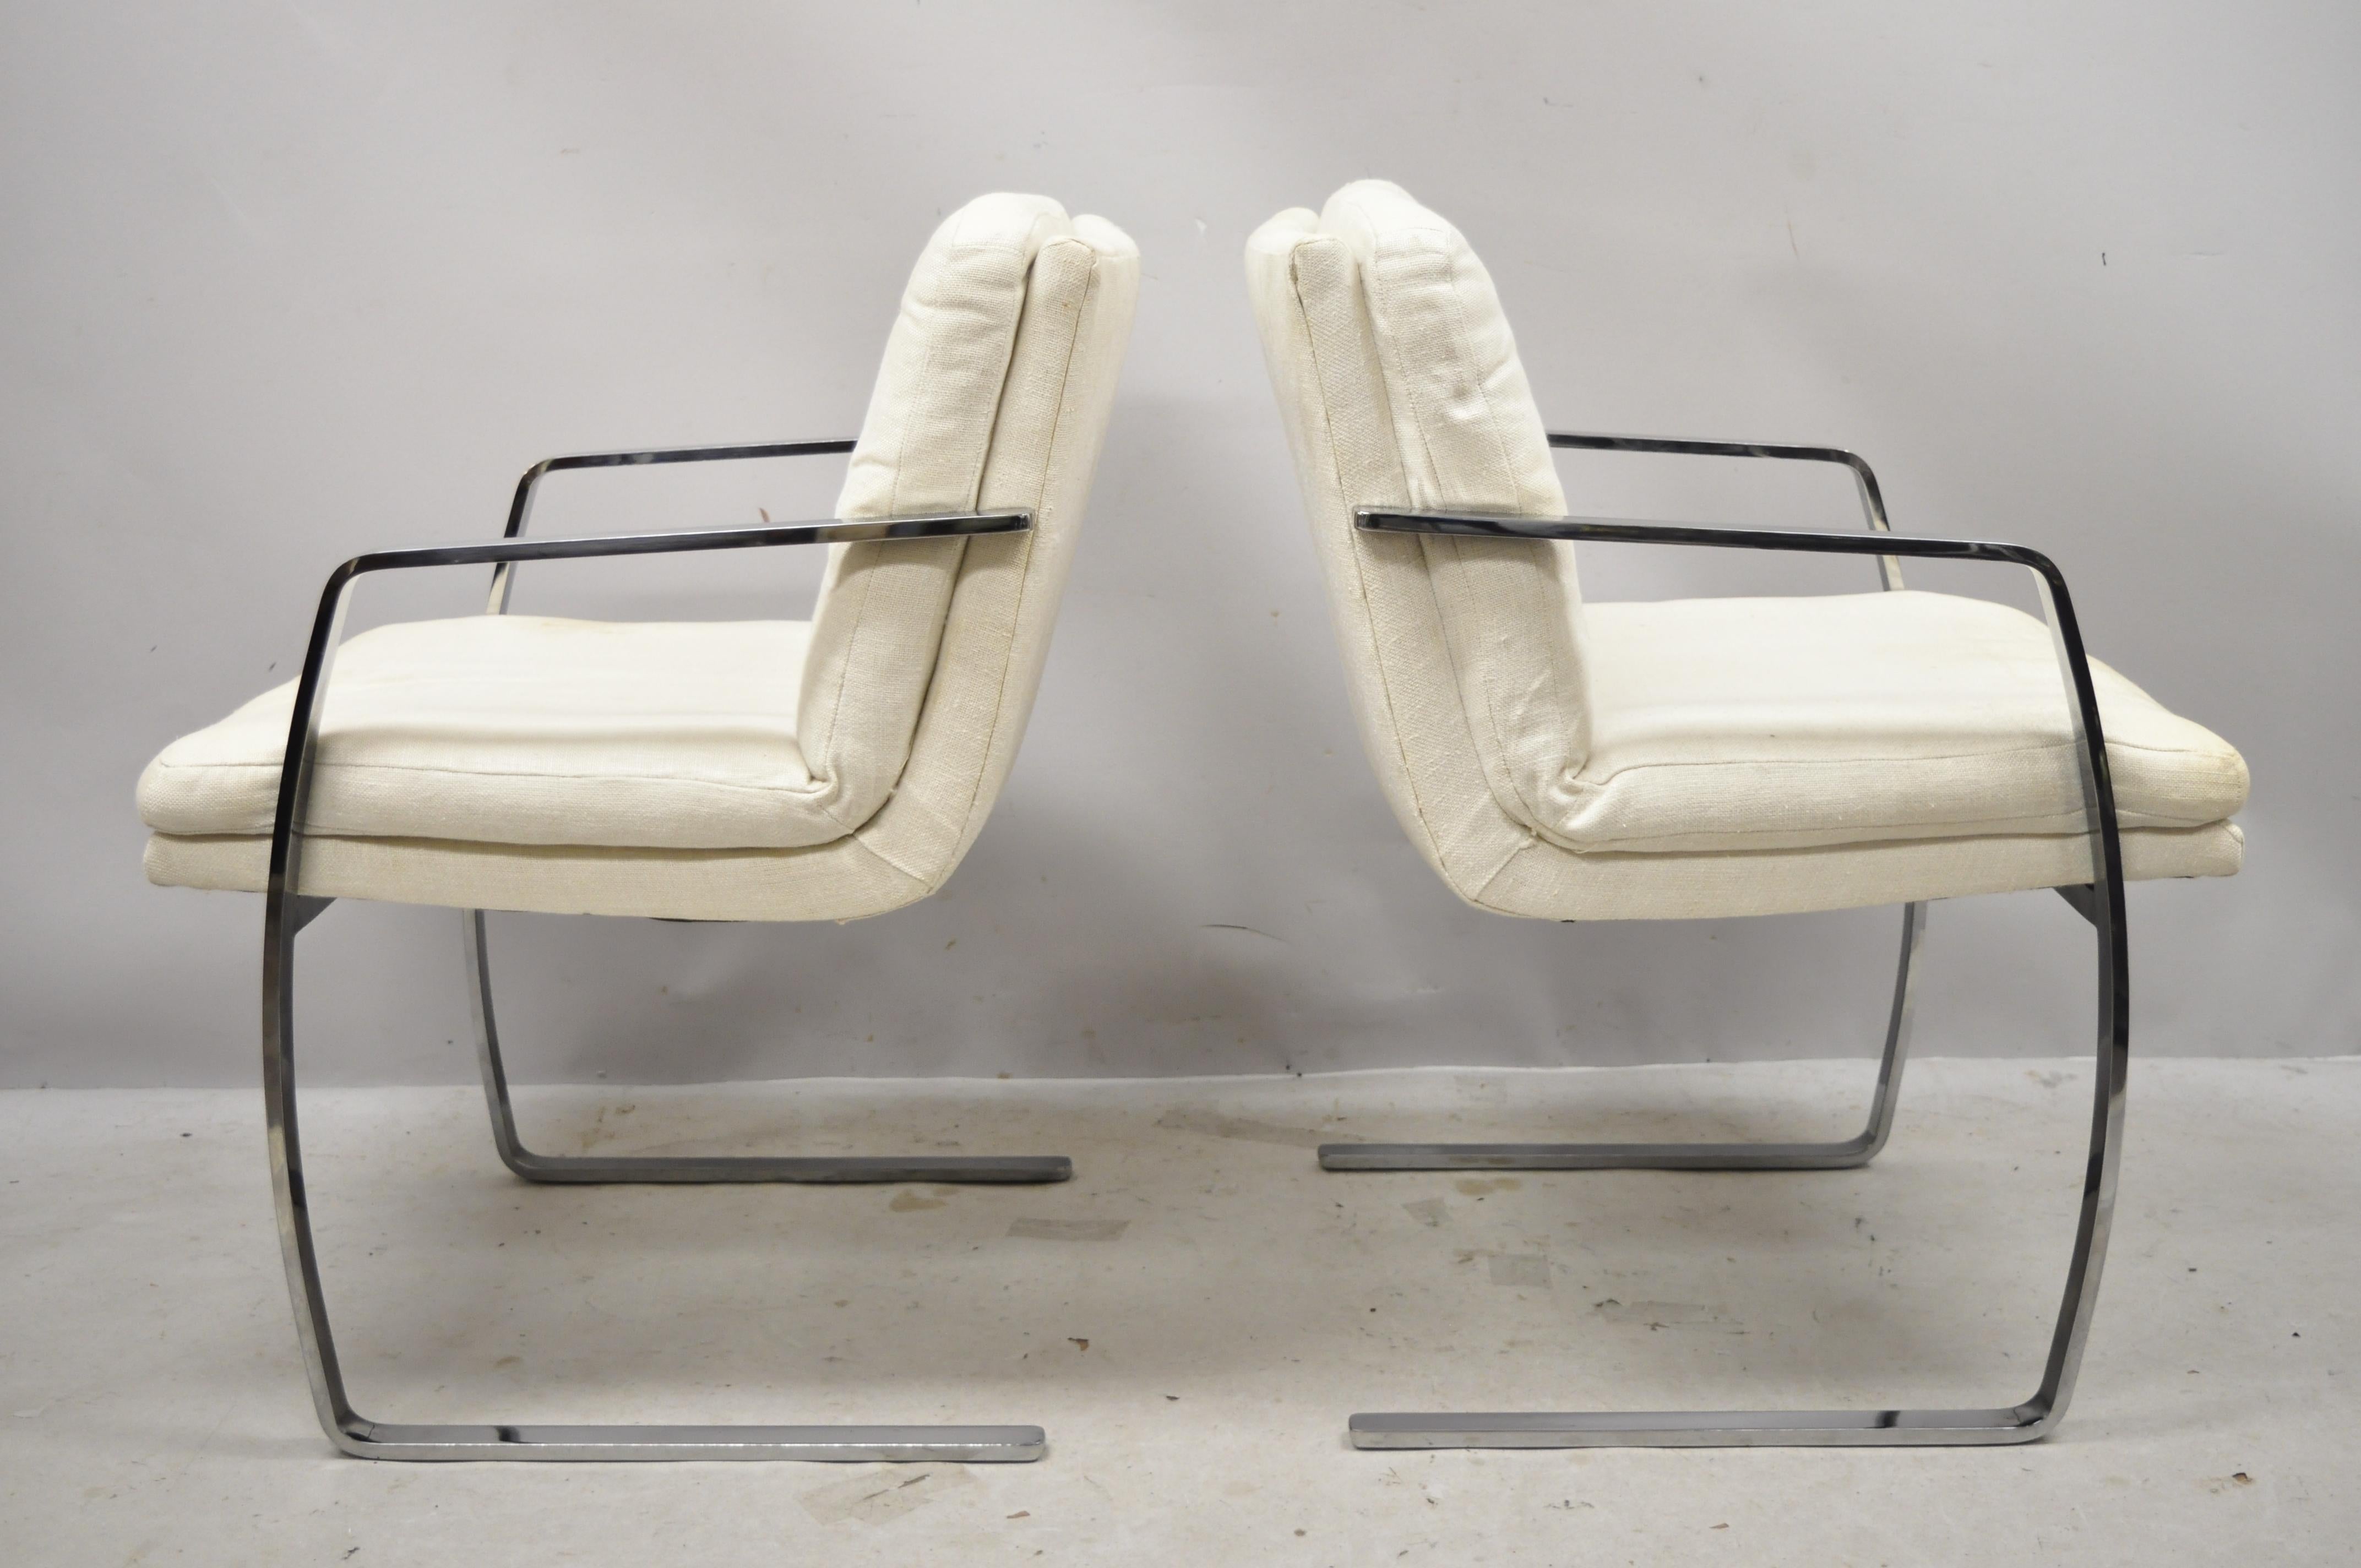 North American Mid-Century Modern BRNO Style Chrome Cantilever Lounge Armchairs 'B', a Pair For Sale